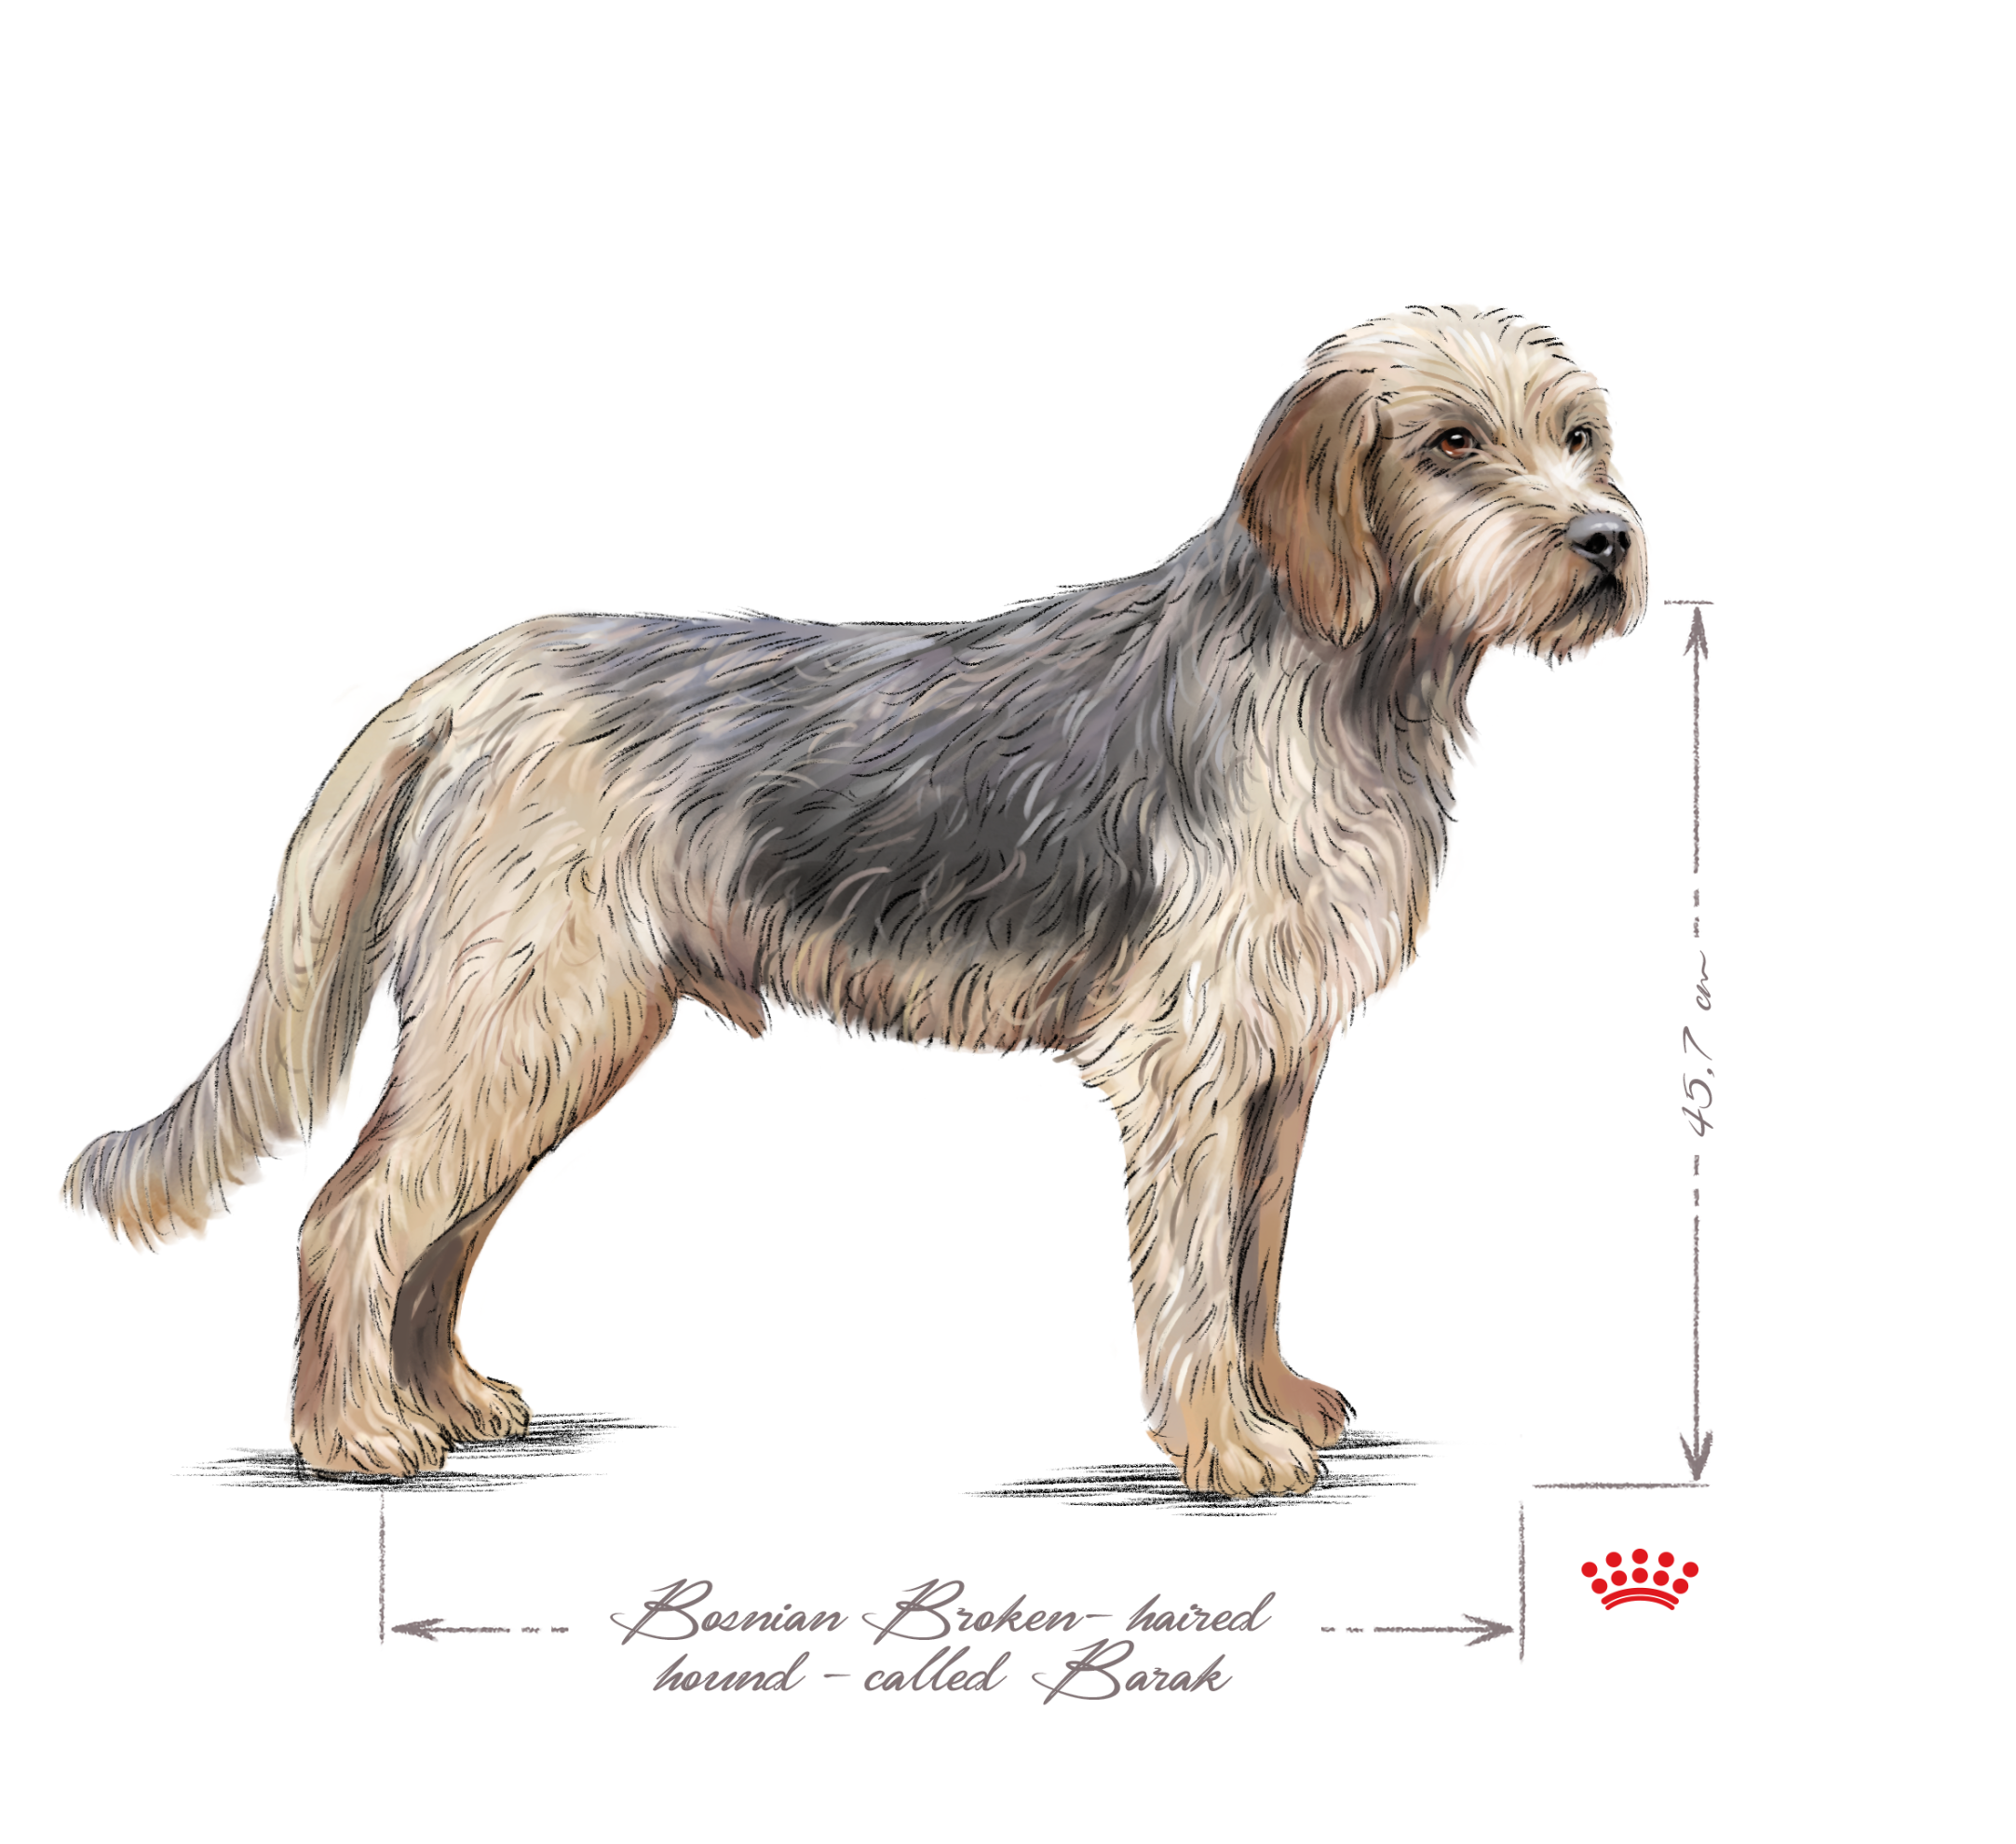 Bosnian Coarse haired Hound called Barak adult black and white